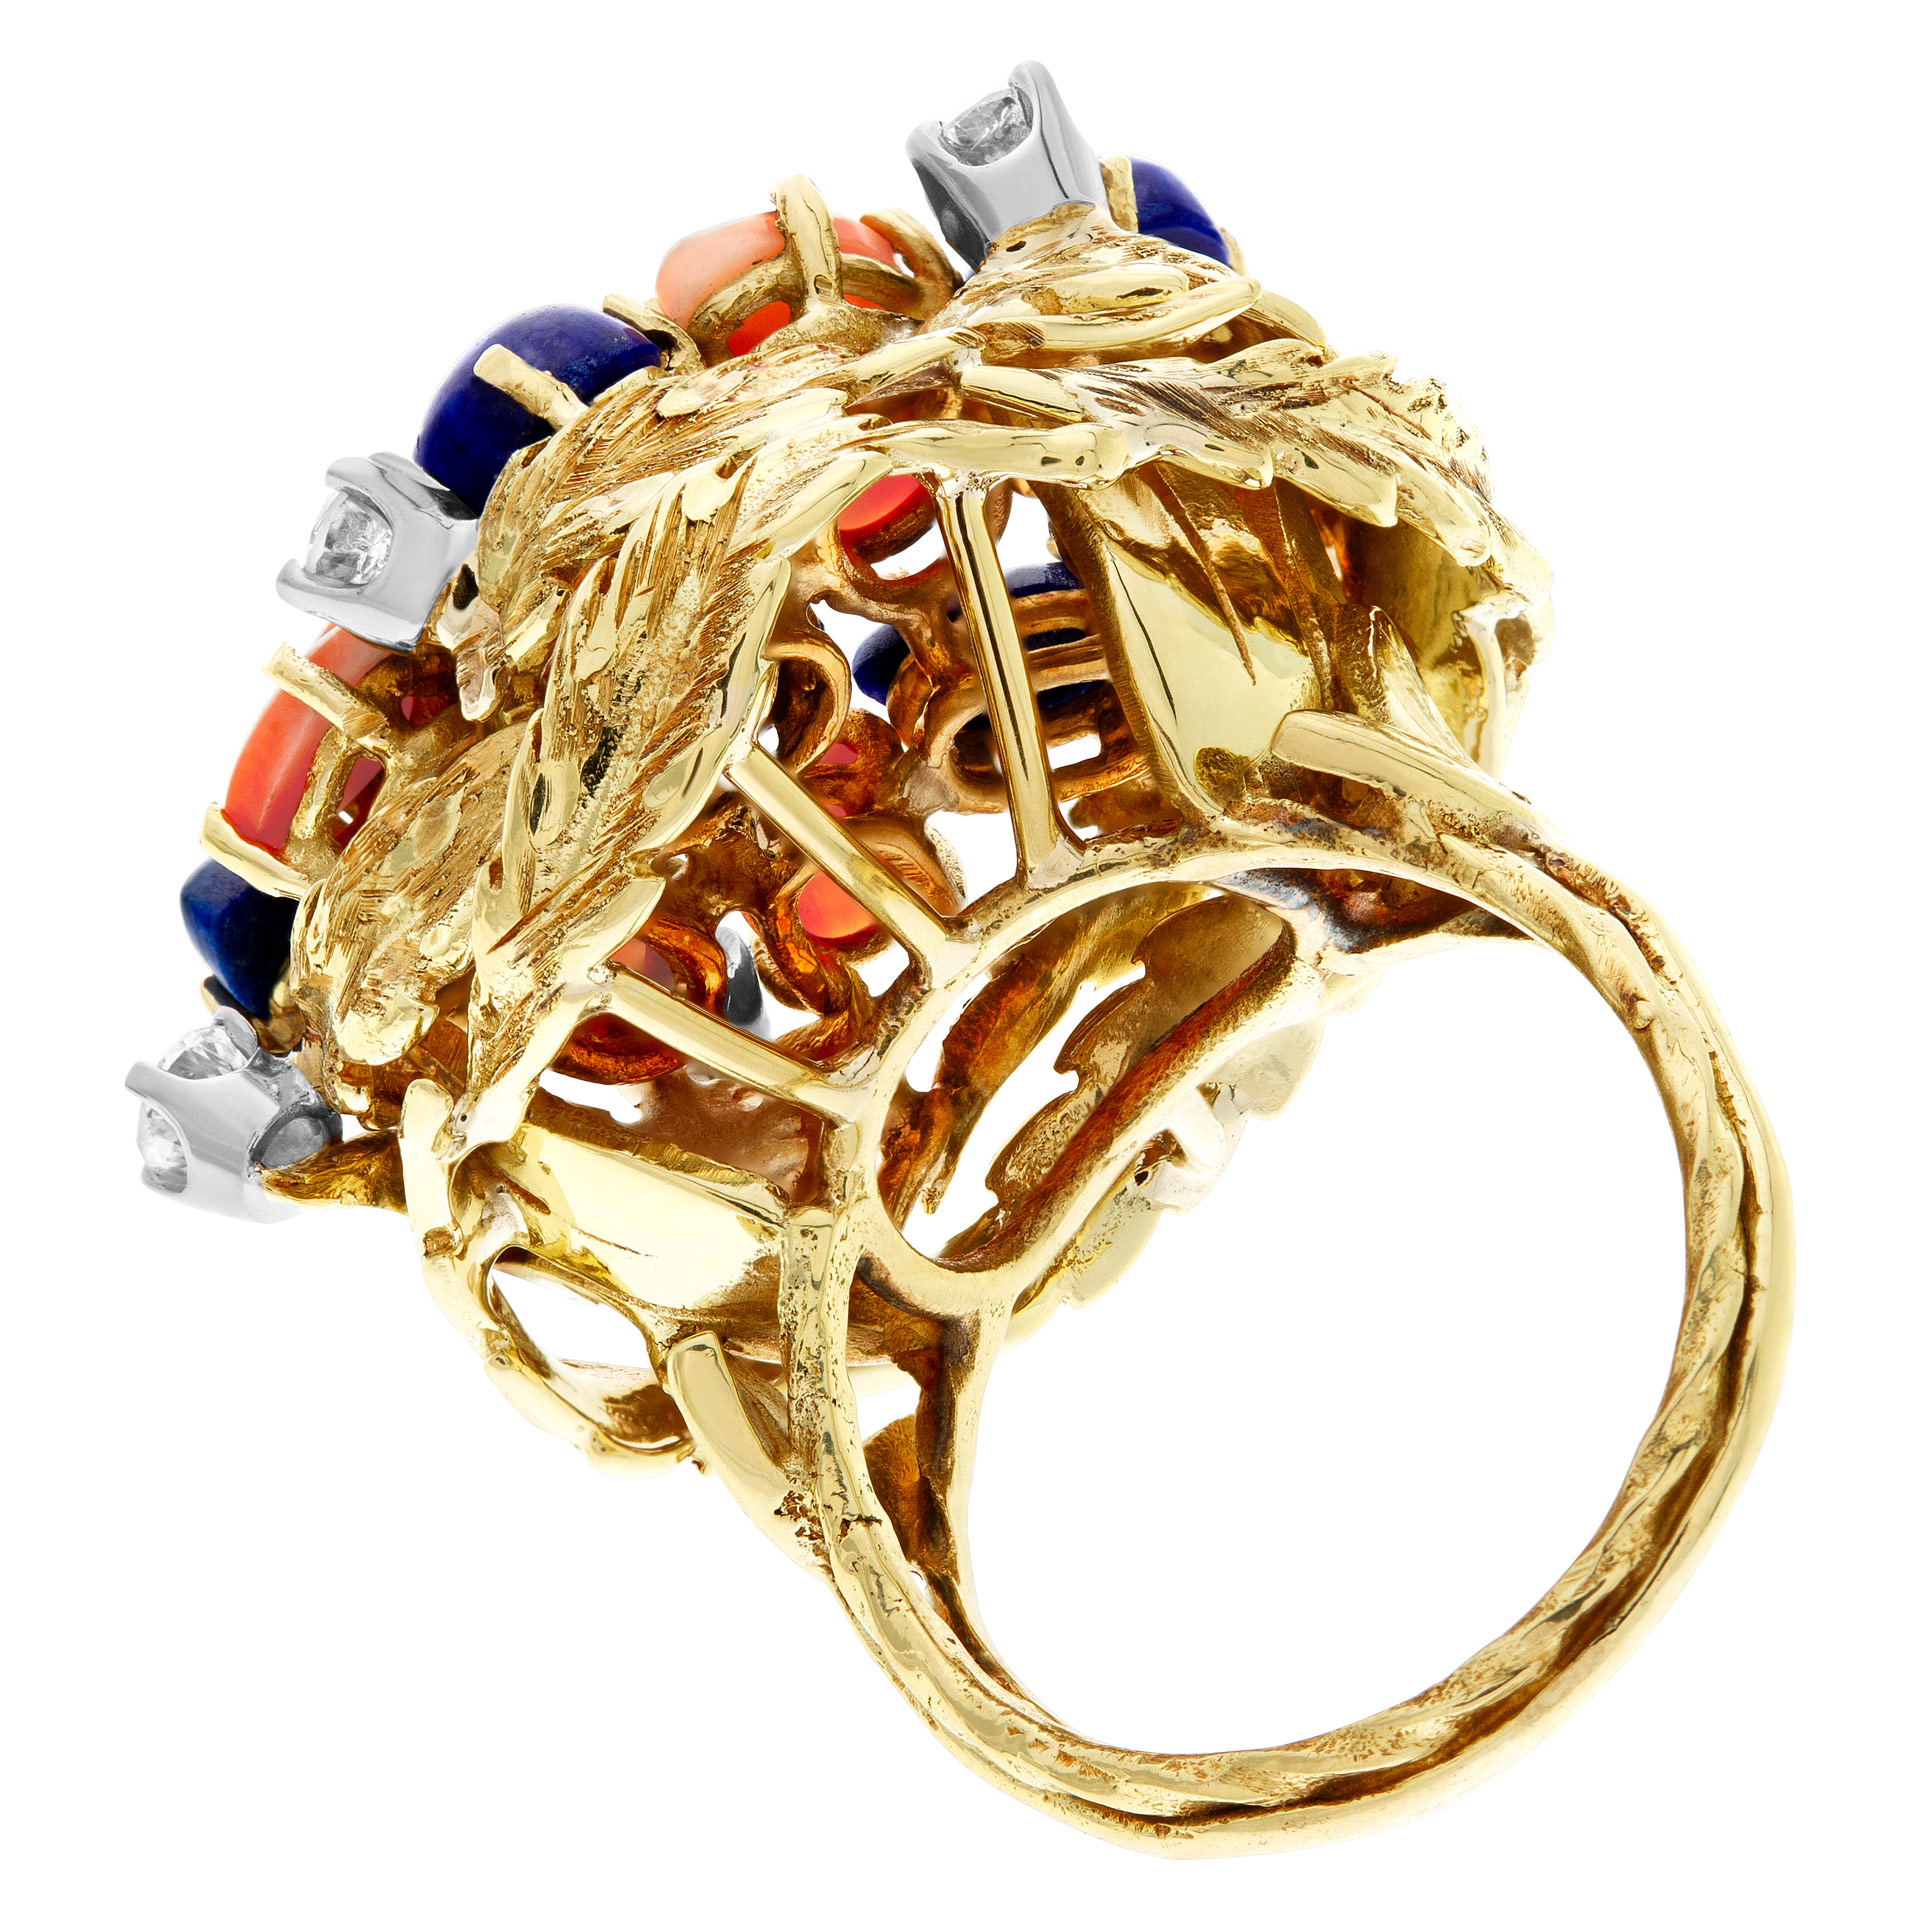 Lapiz lazuli & coral garden ring in 18k yellow gold with diamond accents image 4